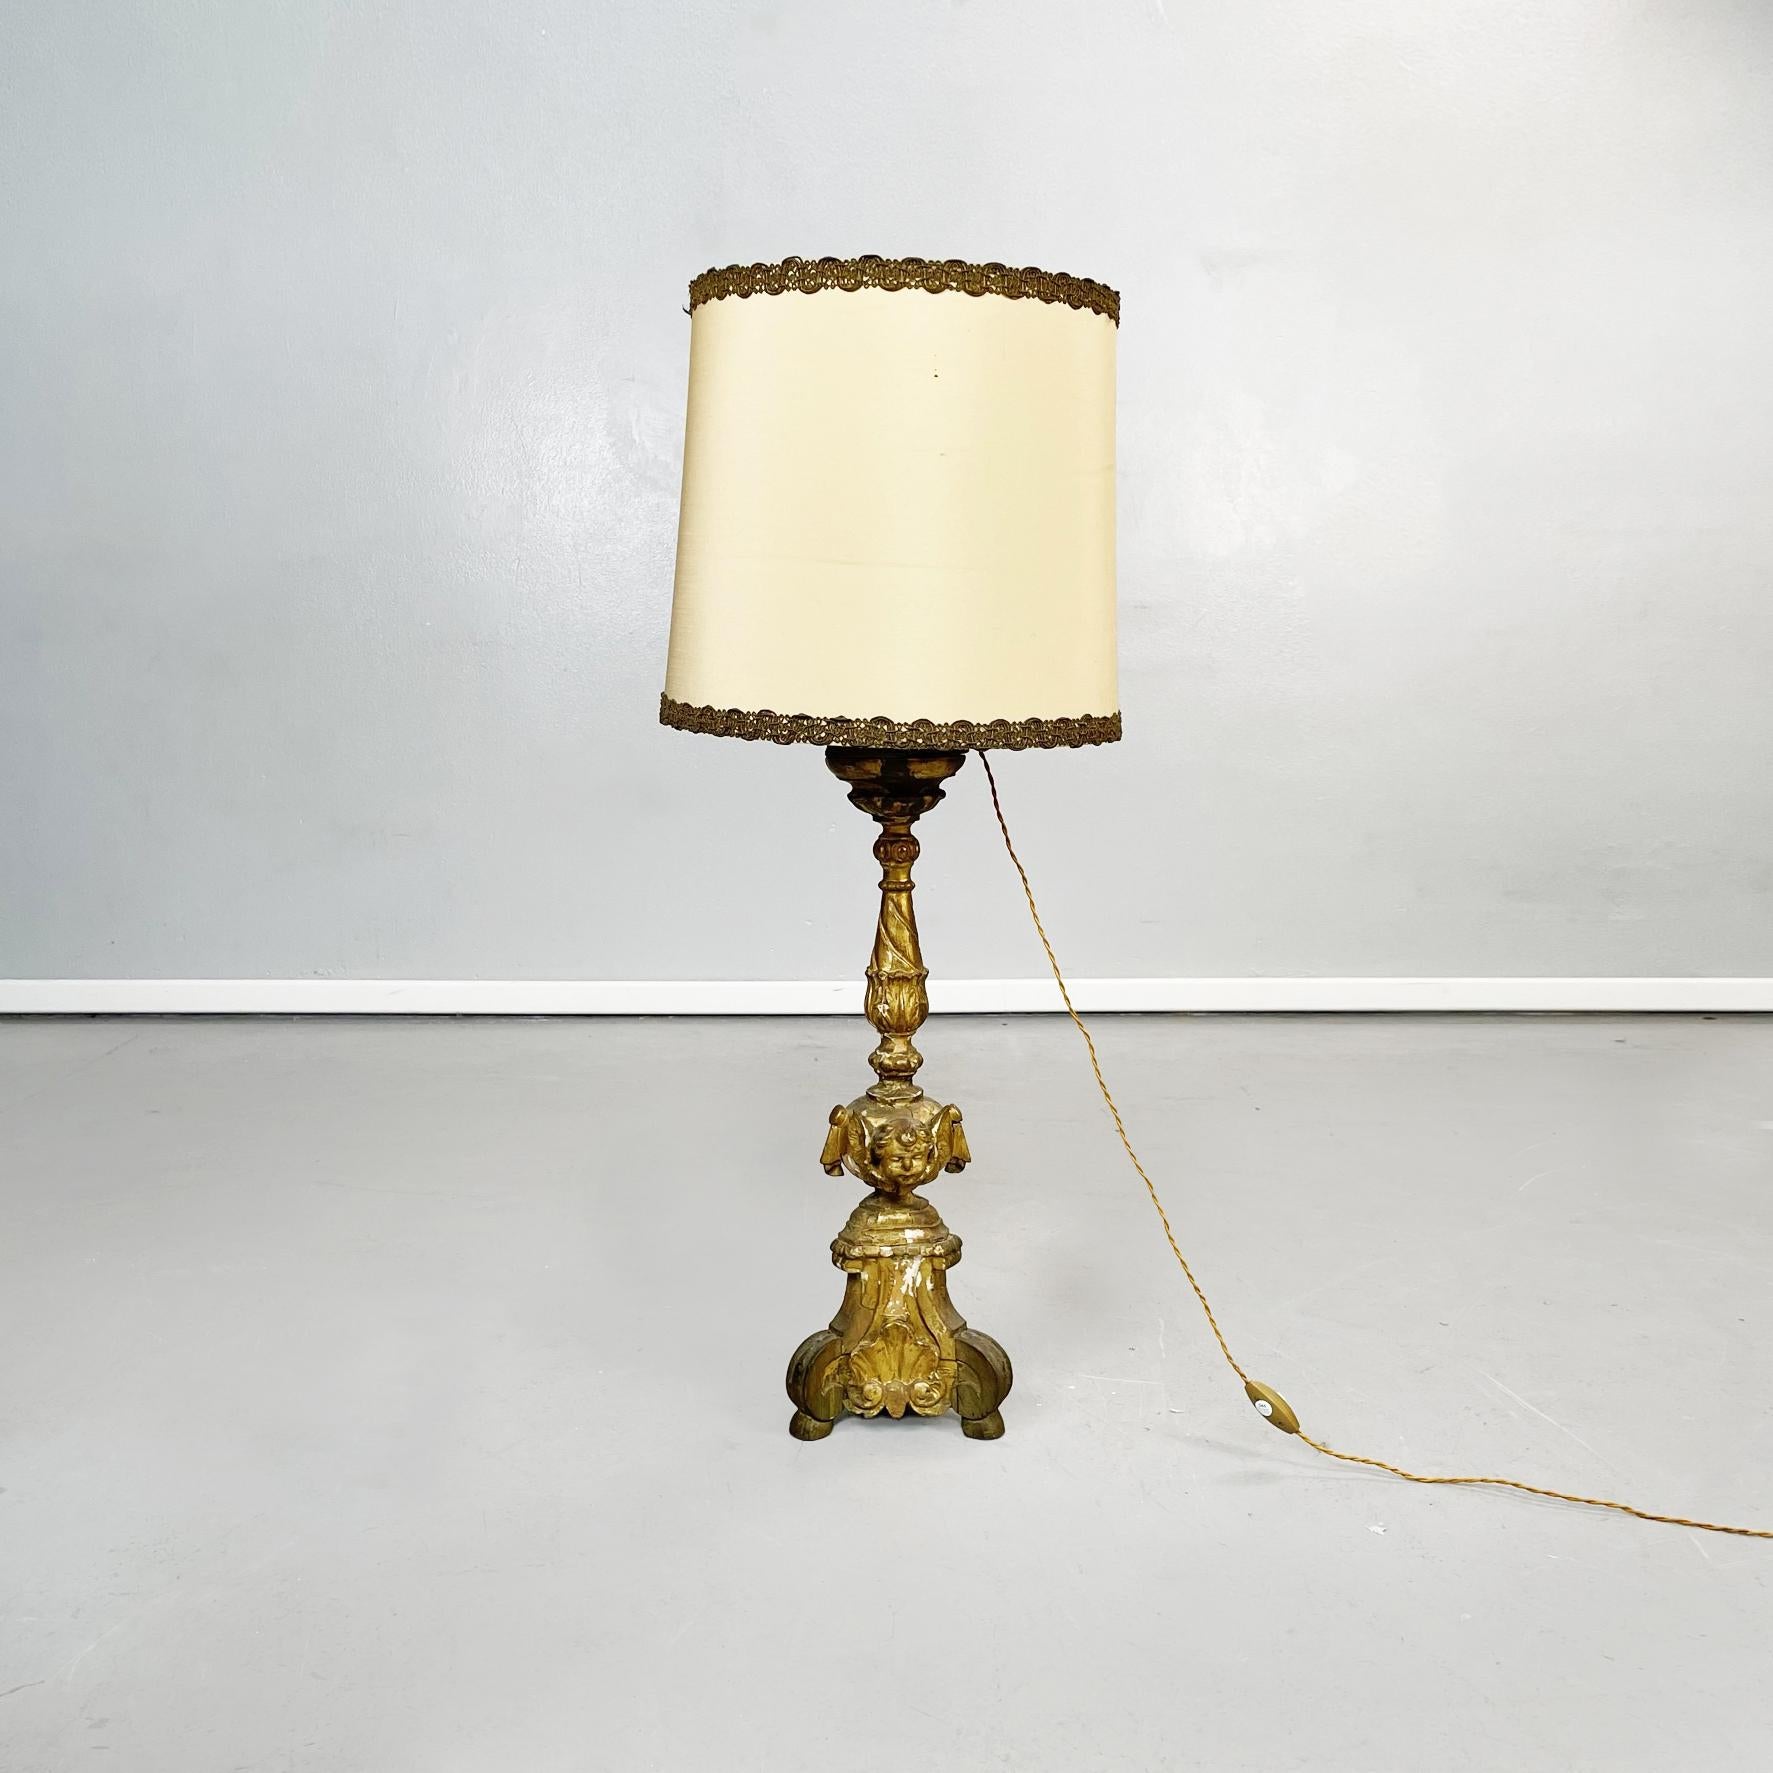 Italian Antique Candelabra Lamps in Gold Painted Wood and Beige Fabric, 1800s In Good Condition For Sale In MIlano, IT